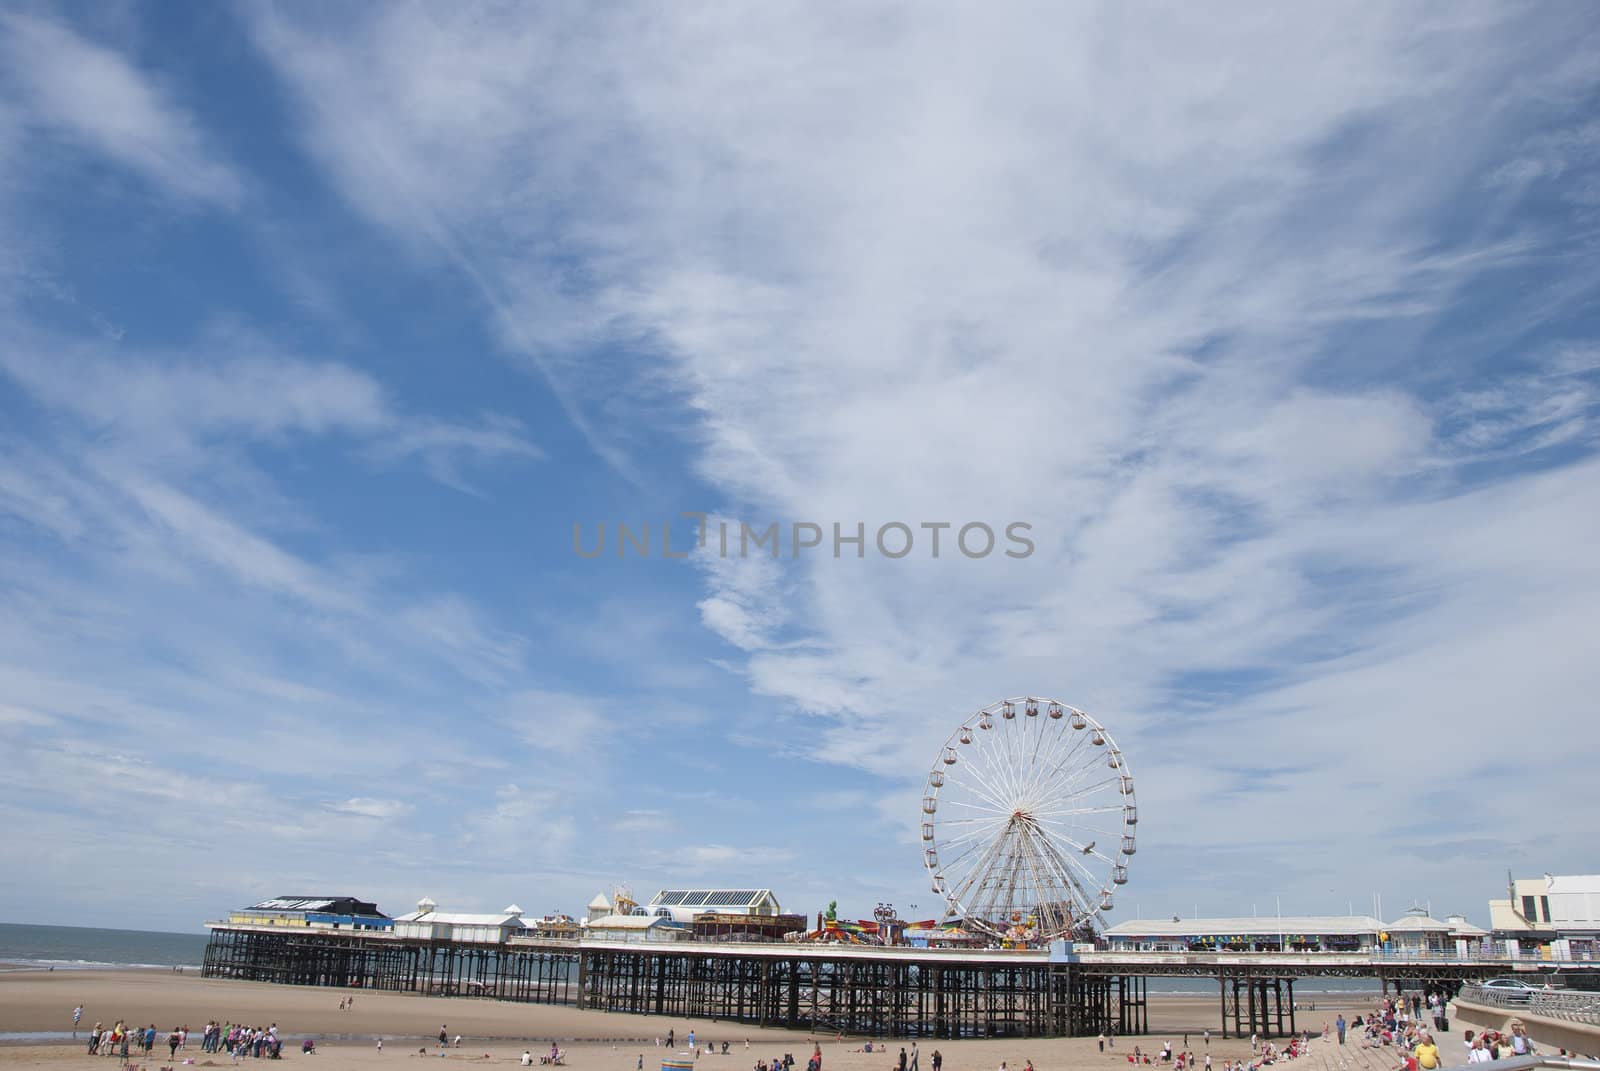 Central Pier2 by d40xboy